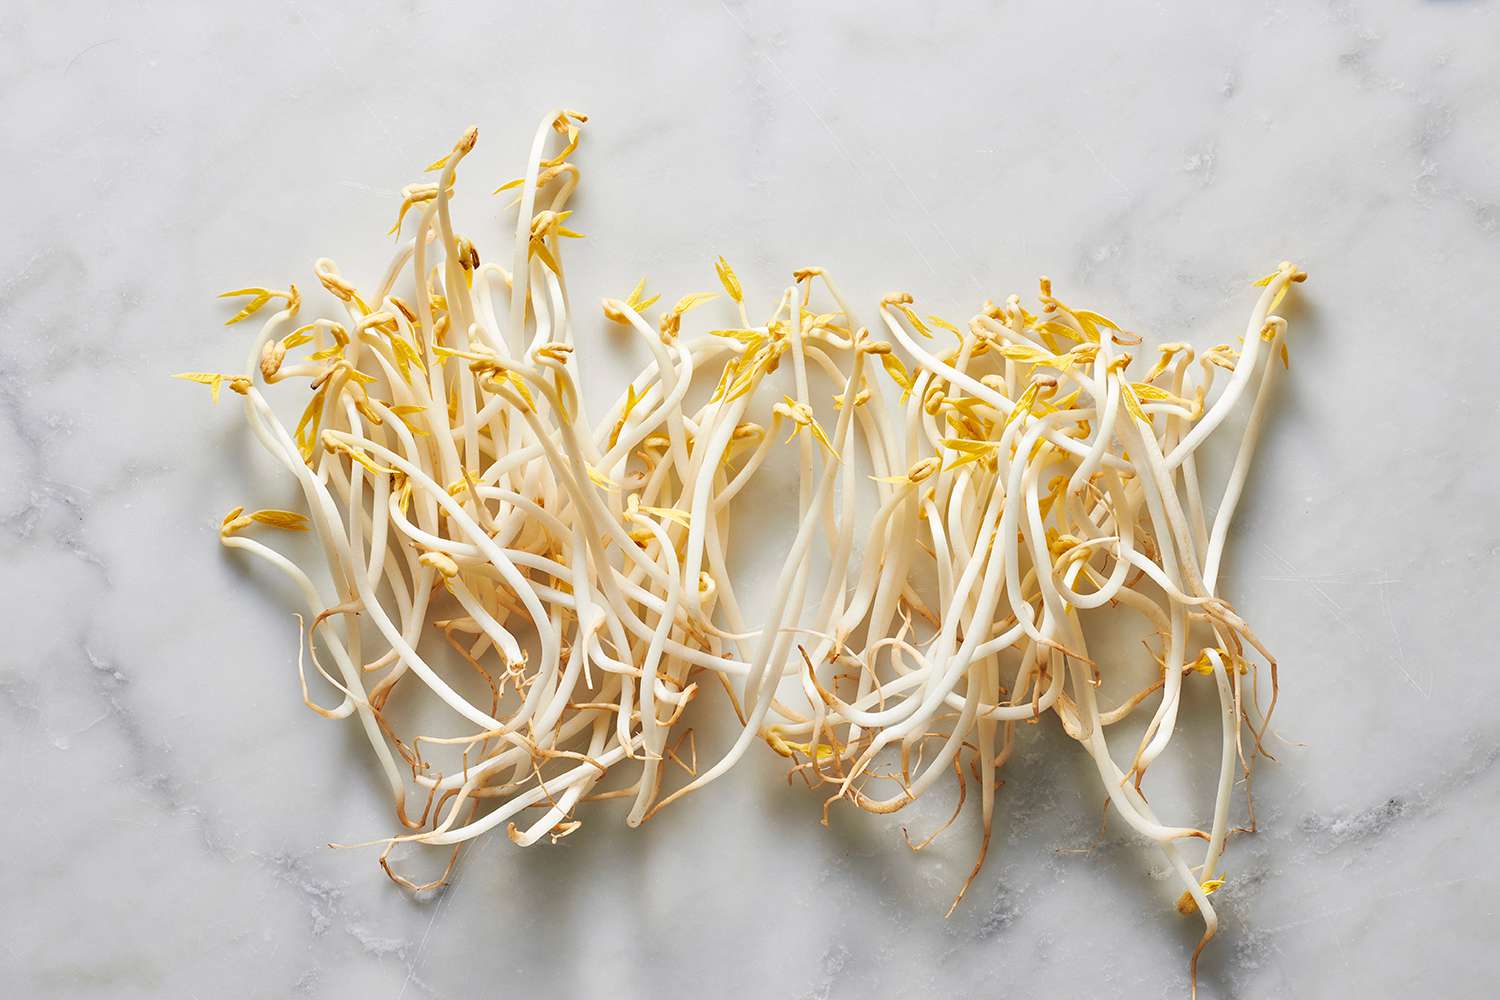 Bean Sprouts: A Nutrient-Dense Addition to Your Diet